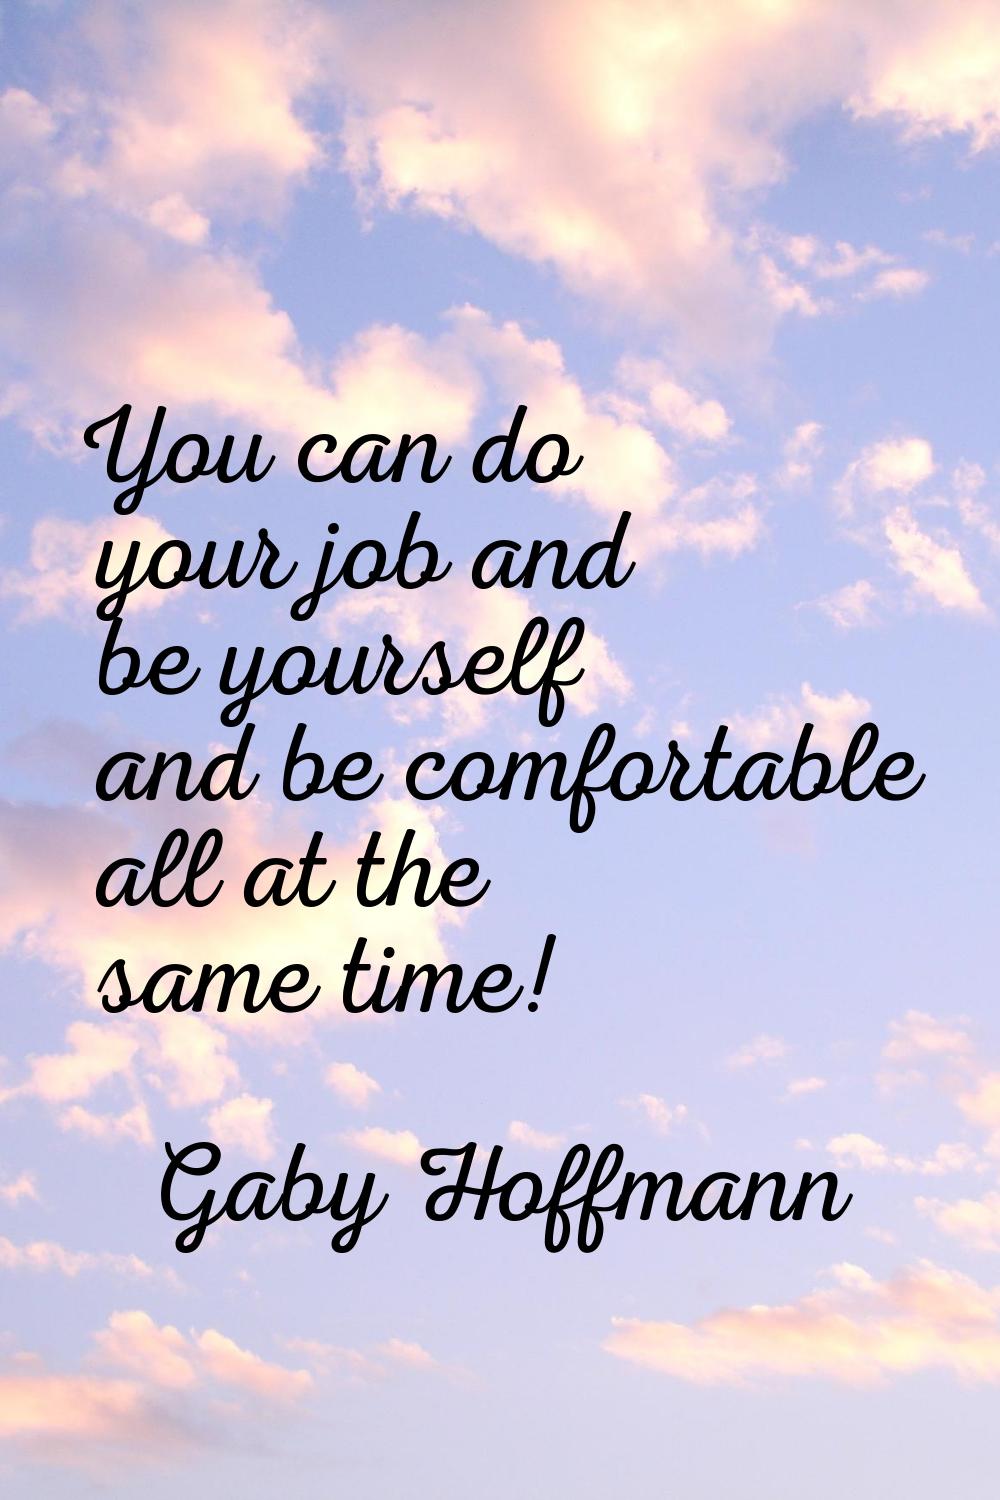 You can do your job and be yourself and be comfortable all at the same time!